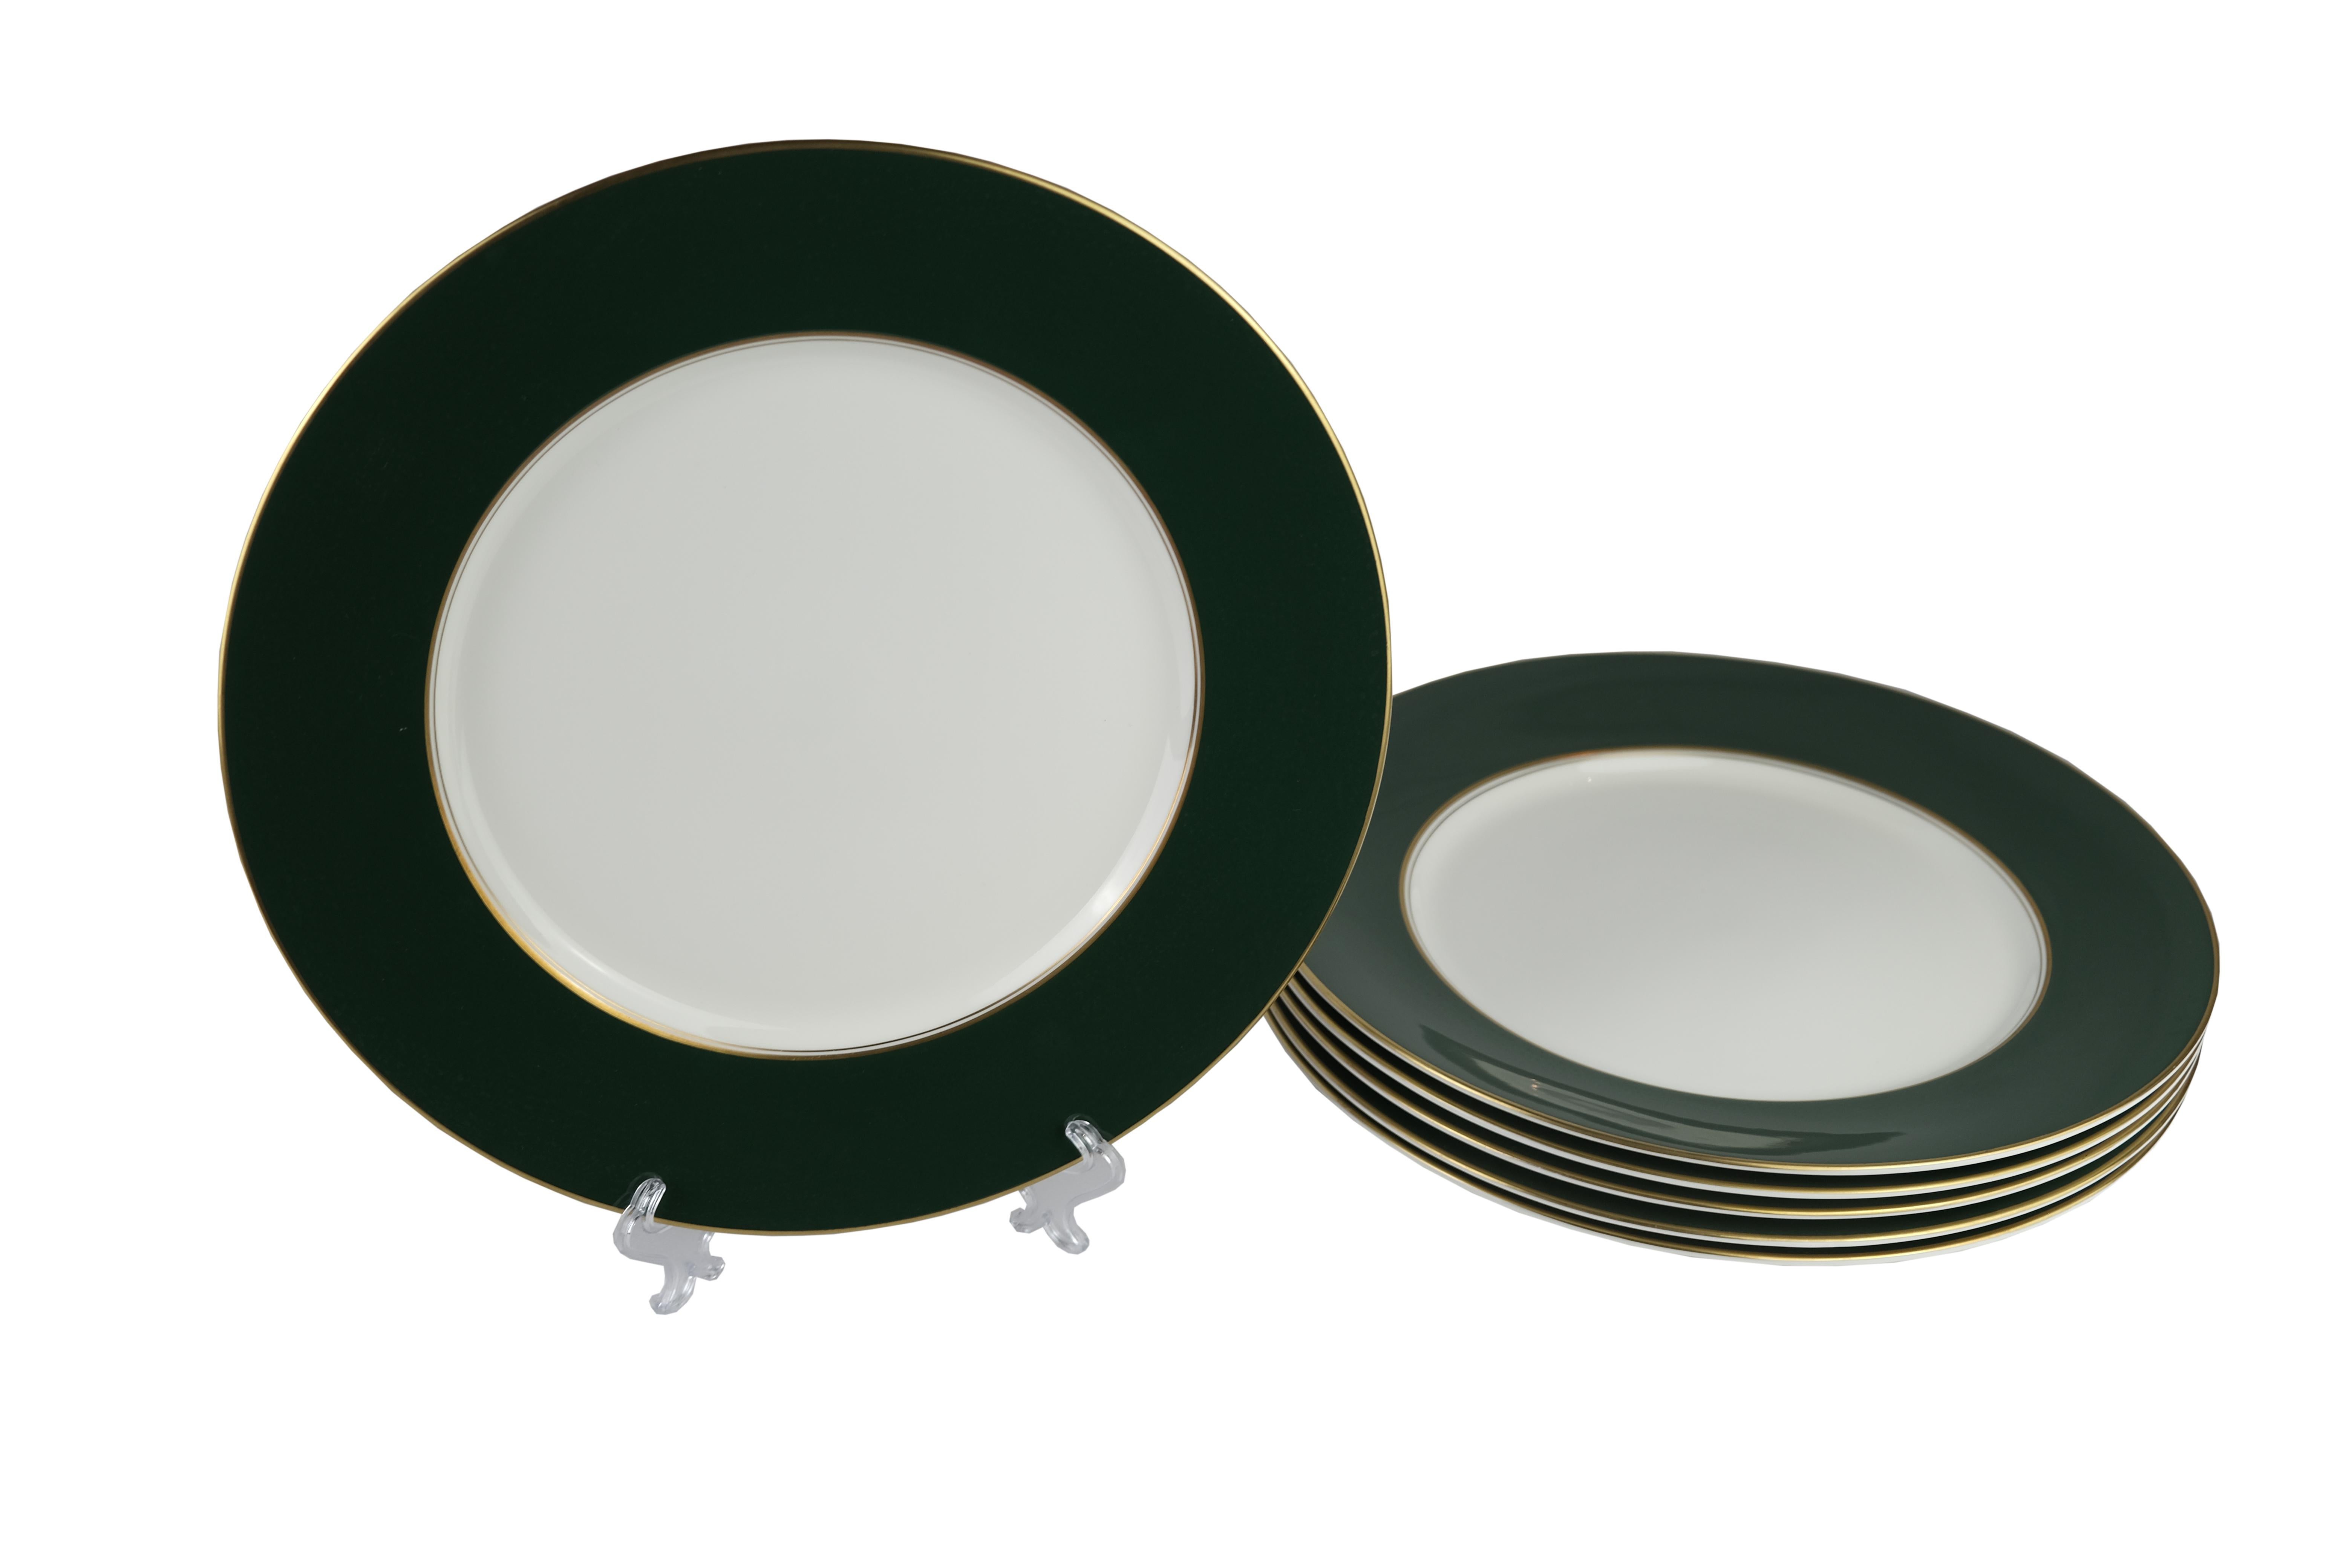 Set of six bone china forest green and gold rimmed chargers by Royal Worcester,
England.